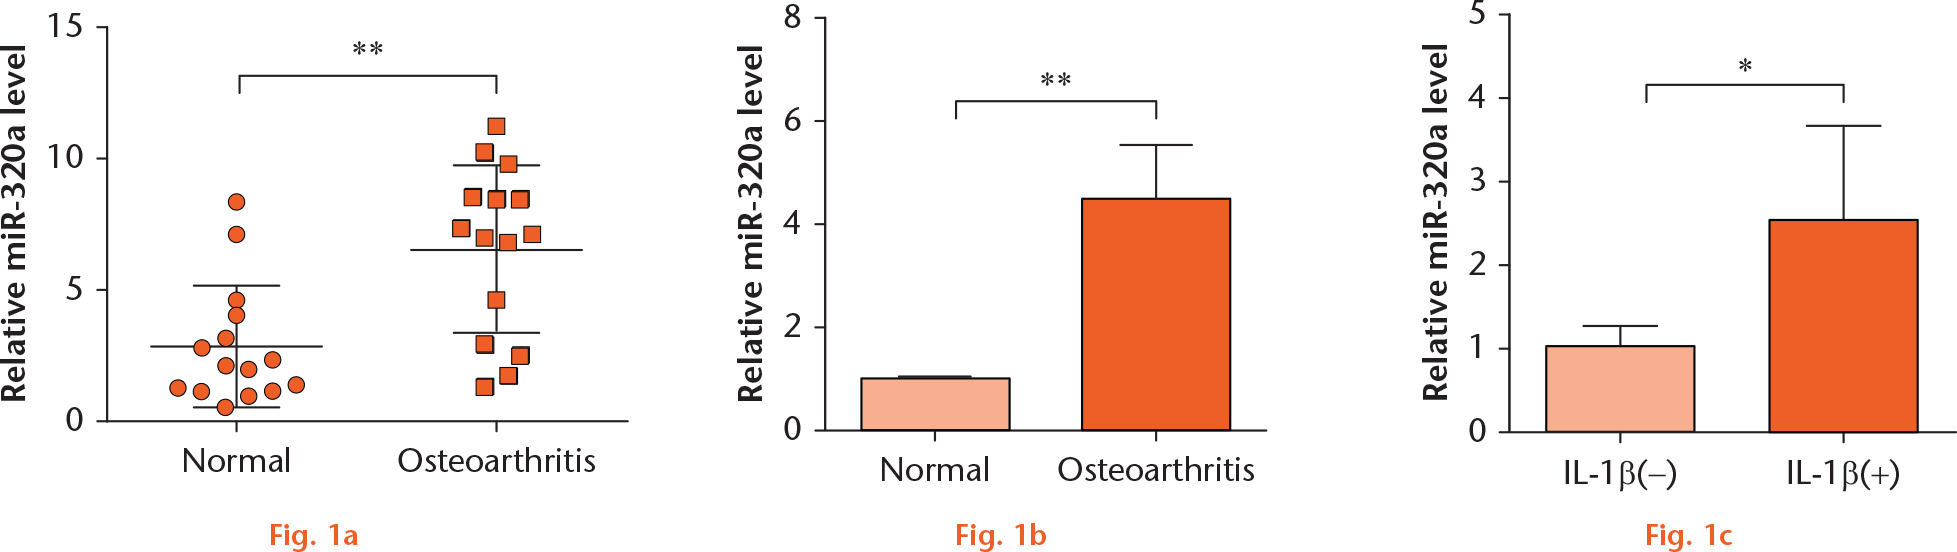  
            miR-320a was elevated in OA. (a) Expression of miR-320a in normal (n = 15) and OA cartilage cells (n = 15) was measured by RT-PCR. (b) The level of miR-320a in normal and OA chondrocytes was measured by RT-PCR. (c) C28/I2 cells were stimulated with IL-1β for 24 hours, and then the level of miR-320a was determined by RT-PCR. *, p < 0.05; **, p < 0.01. Statistical analysis was performed using two-tailed paired t-test.
          